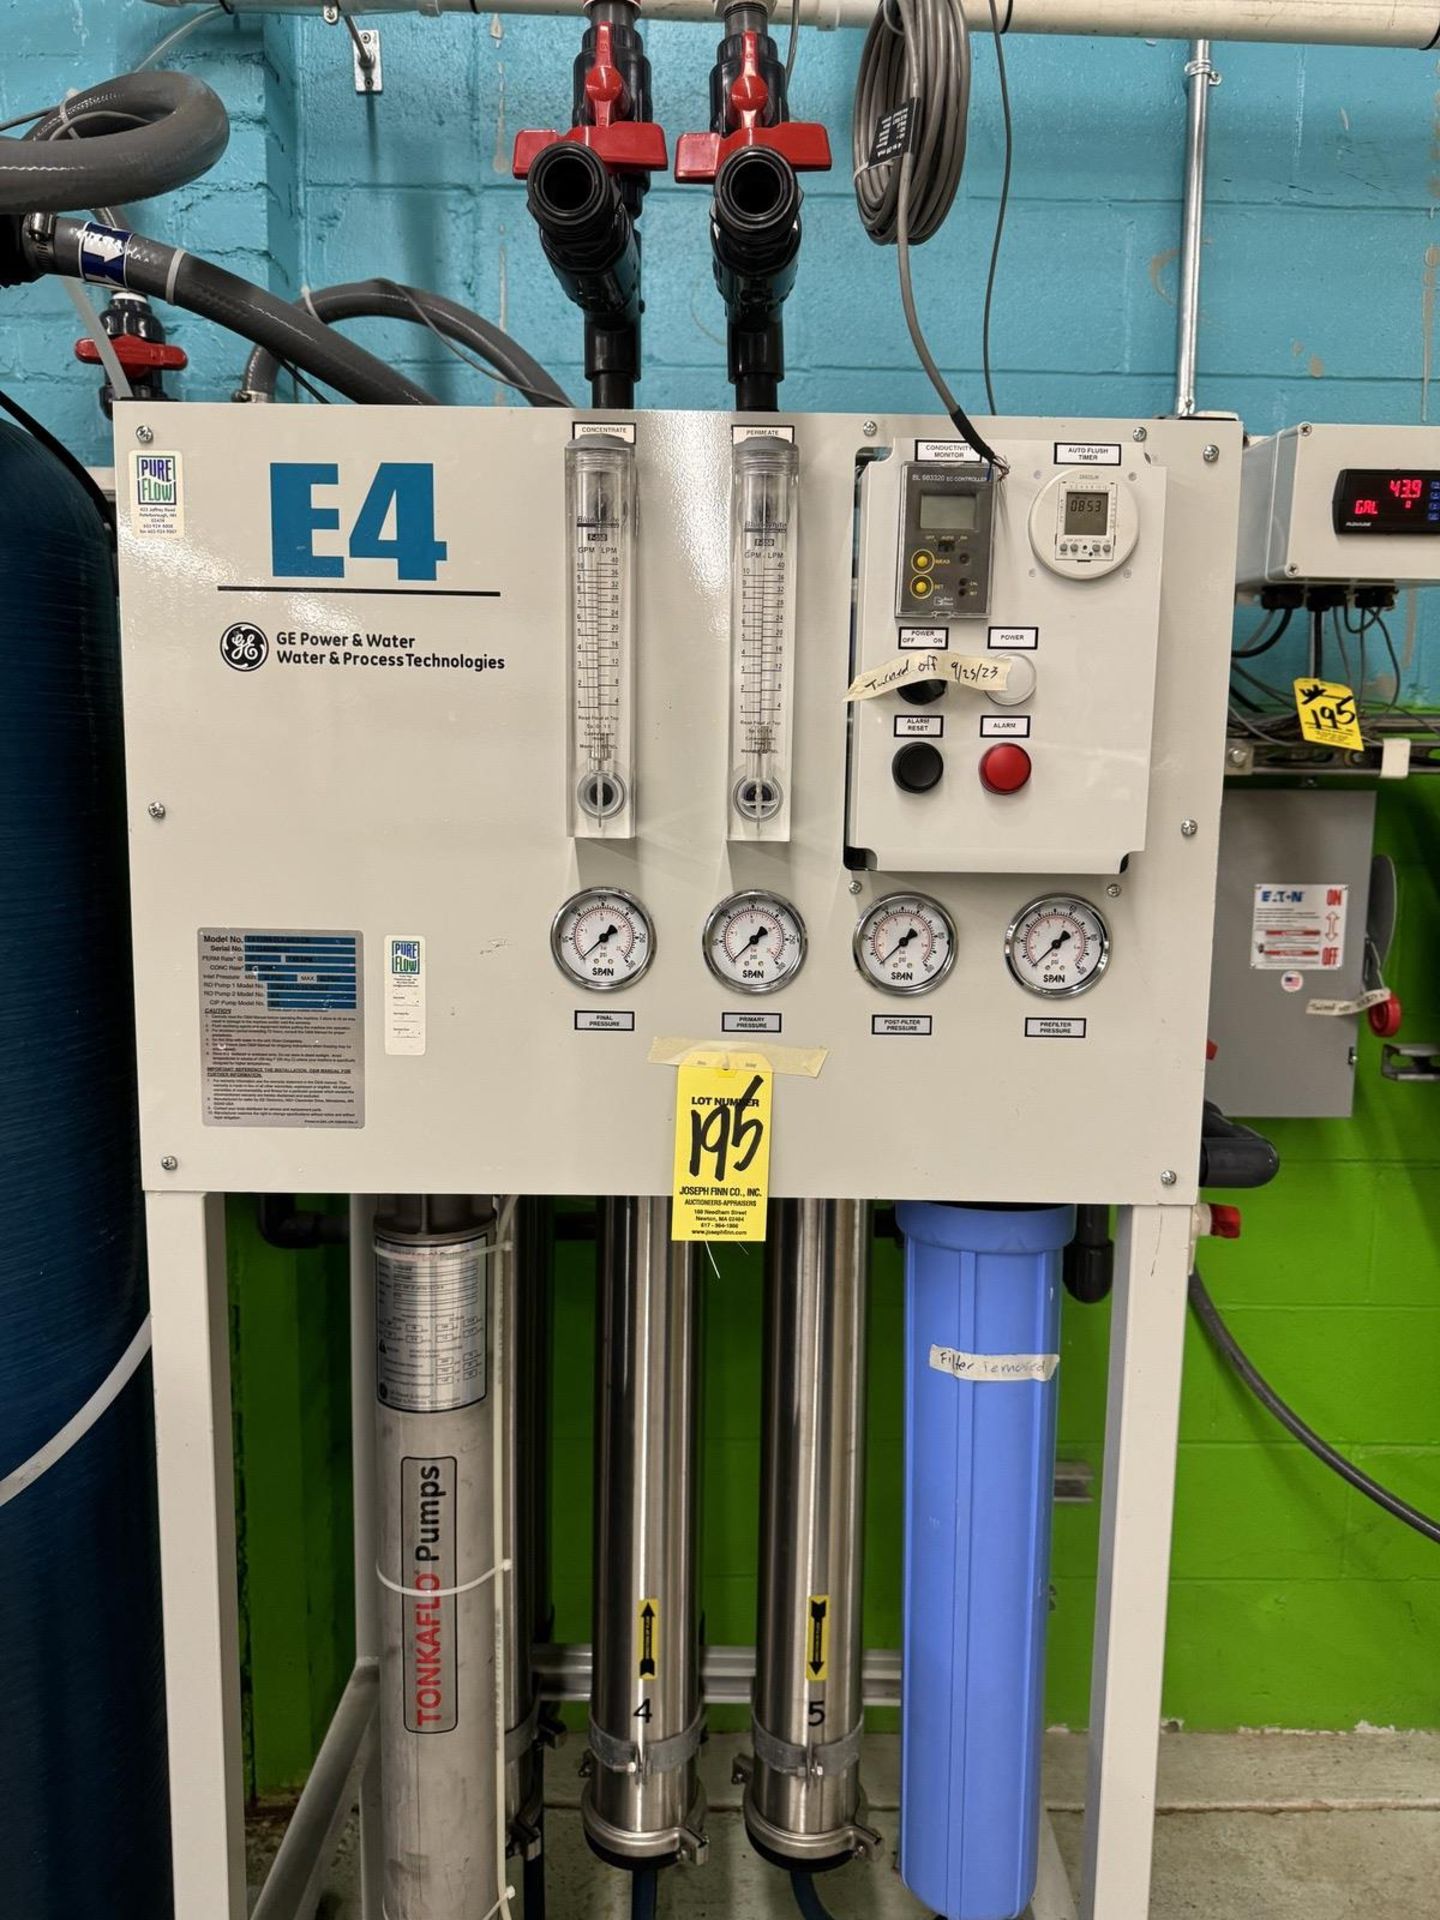 RO System Including GE Power & Water Process Technologies Model E4-110000-DLX-460,6 CW, s/n 17- - Image 2 of 22